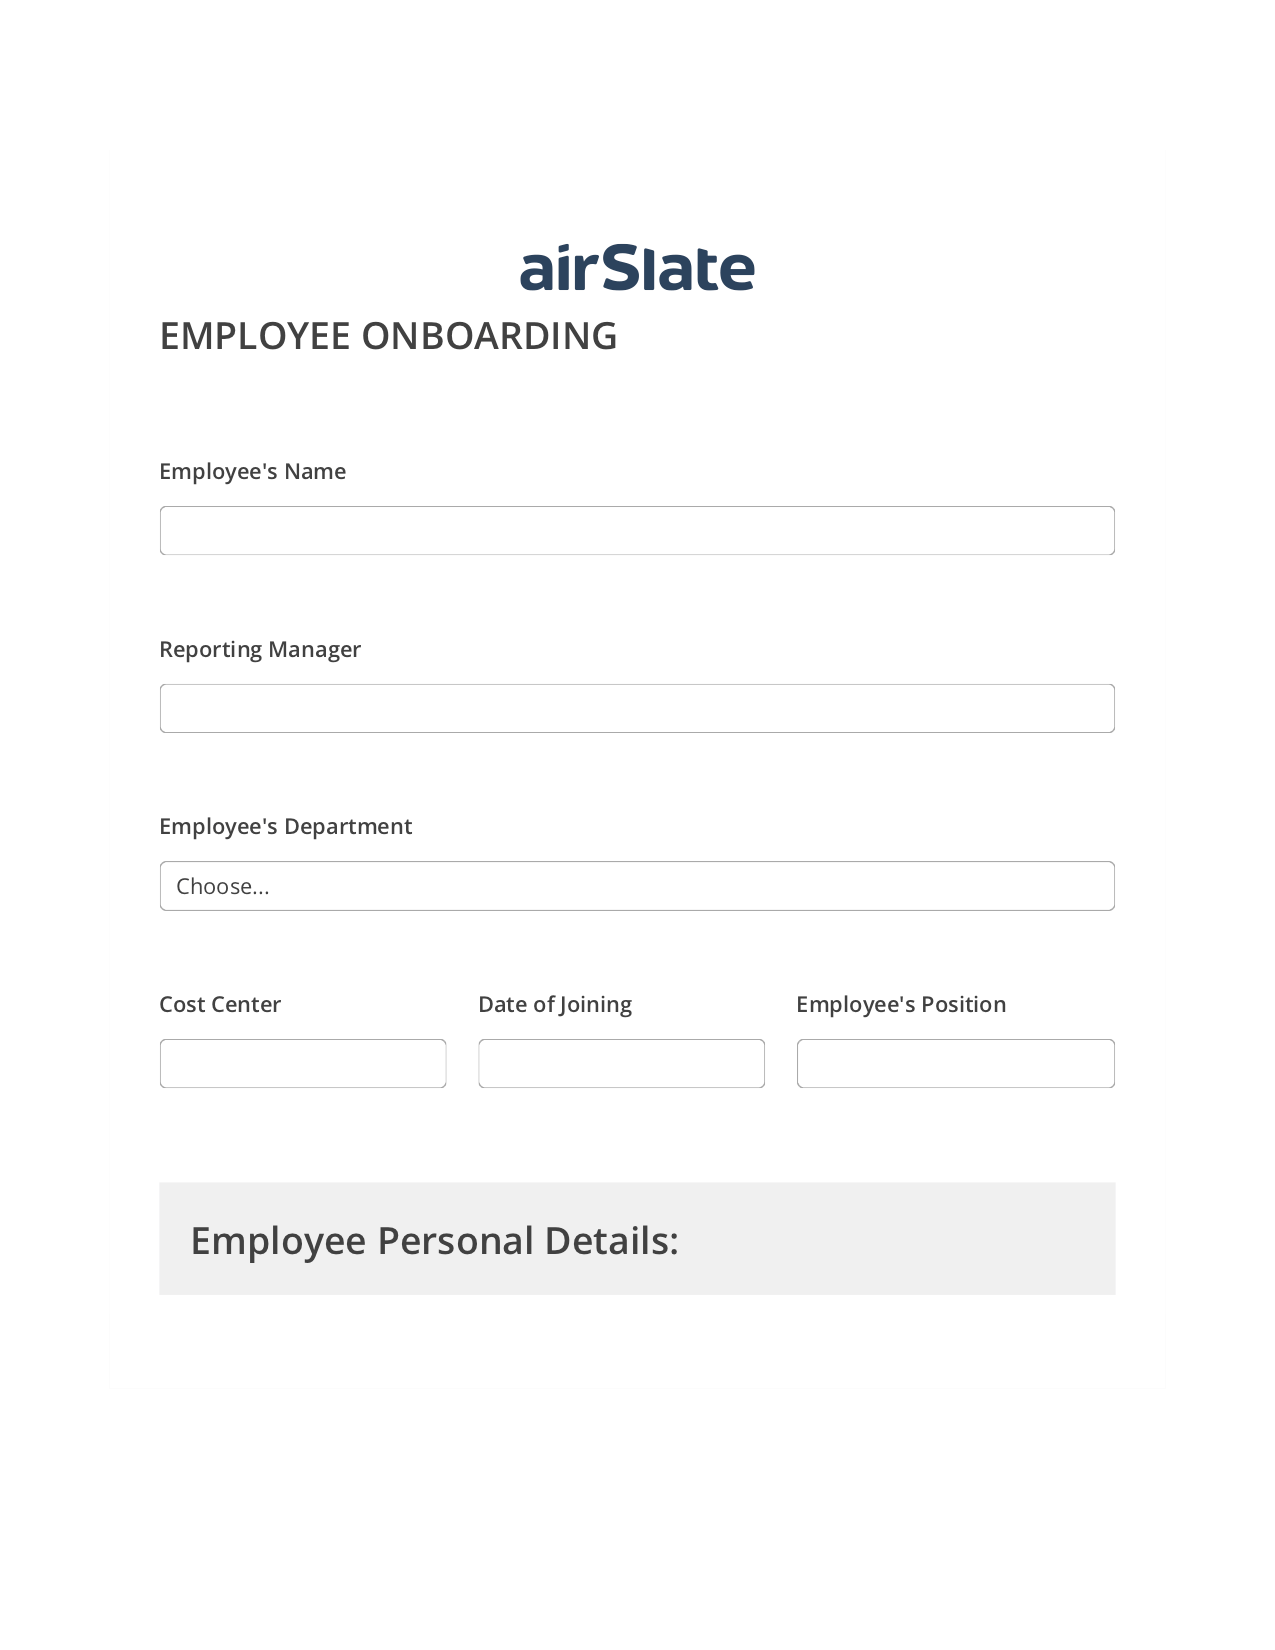 Employee Onboarding Workflow Pre-fill Document Bot, Remove Slate Bot, Archive to Google Drive Bot